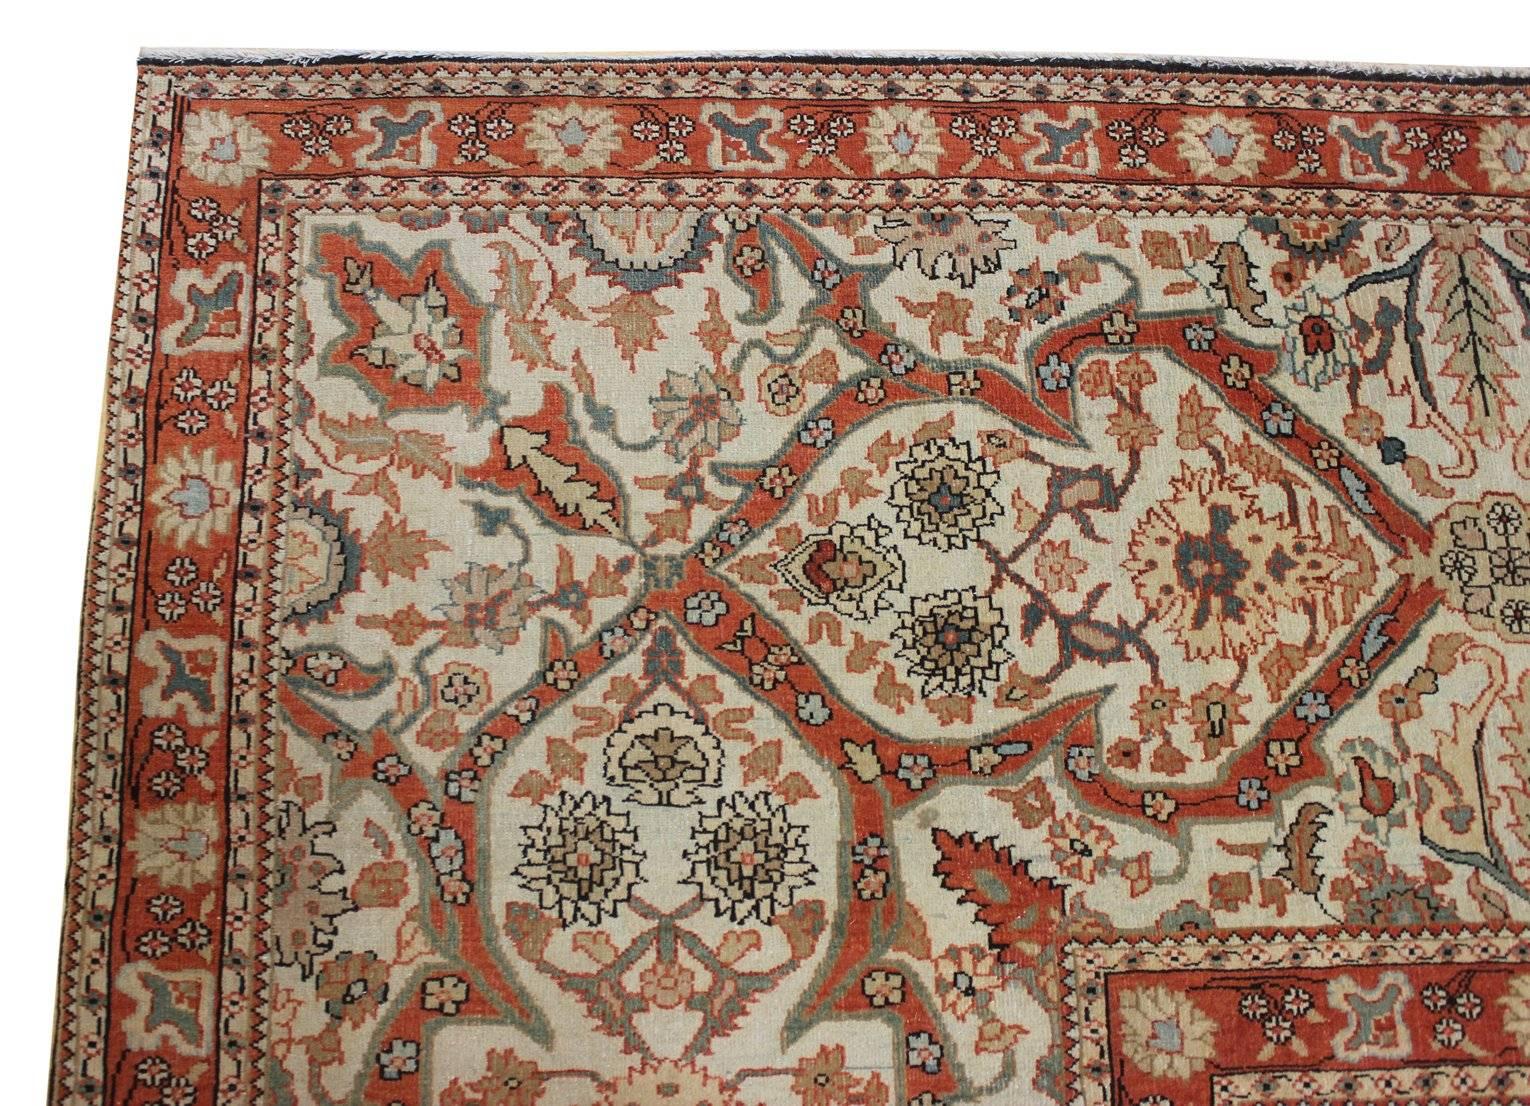 Modern Turkish production of a Motasham Kashan style carpet. Extremely Fine and in perfect condition. All-natural vegetable dyes. Salmon and ivory on light blues. Wool pile on a cotton foundation.